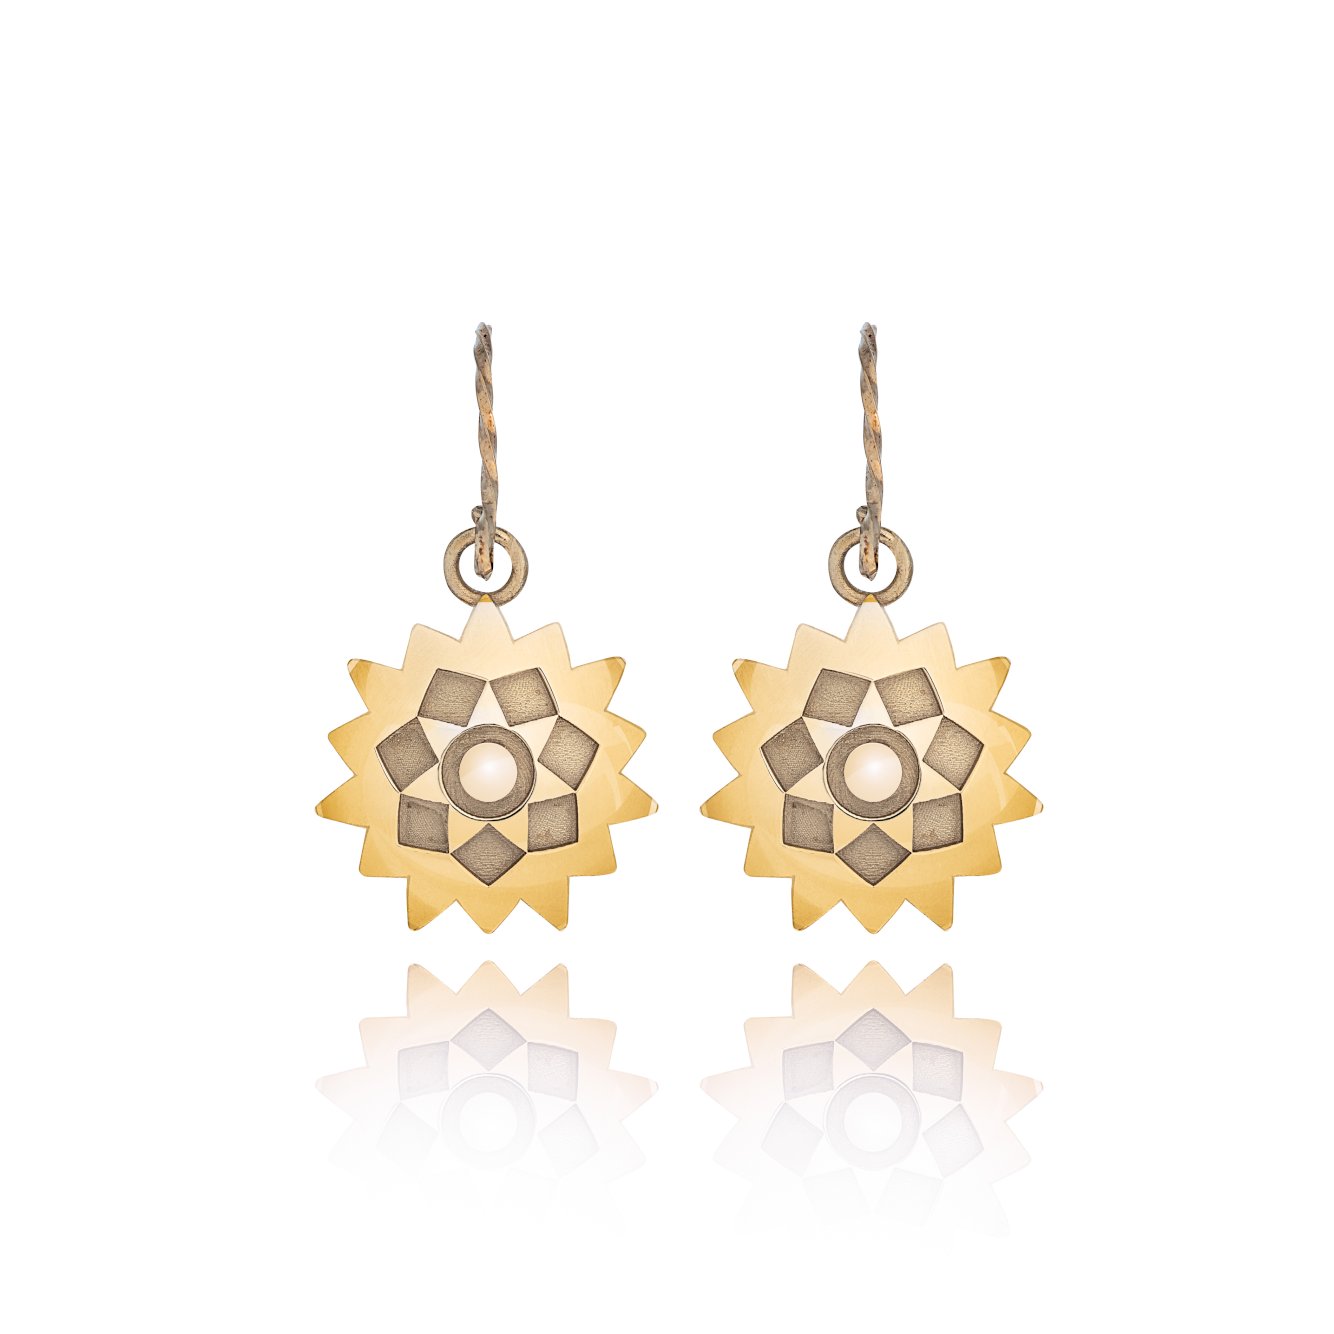 Starburst Drop Earrings - Solid Yellow Gold